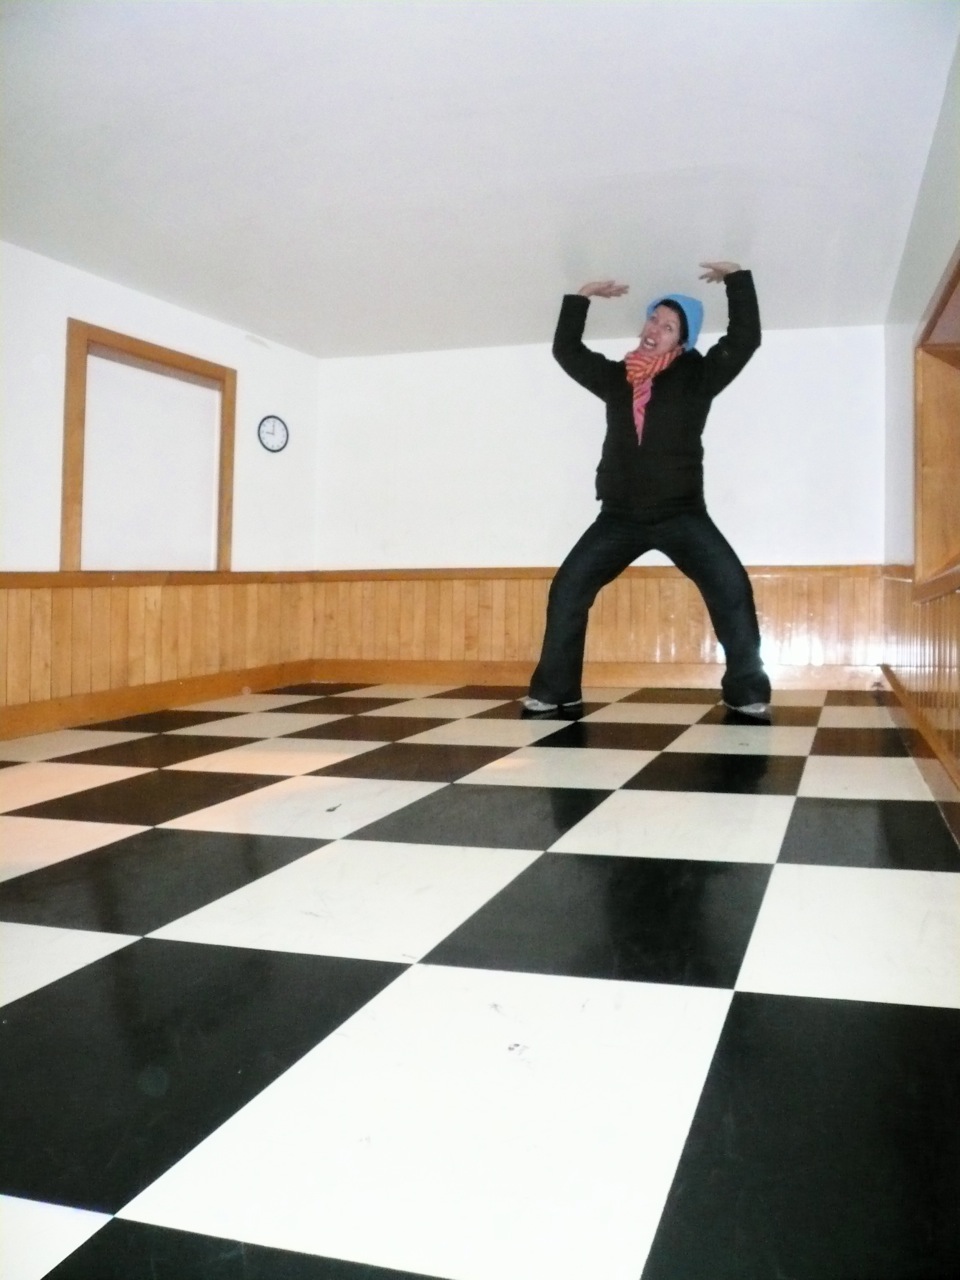 a man in a suit stands in a large floor